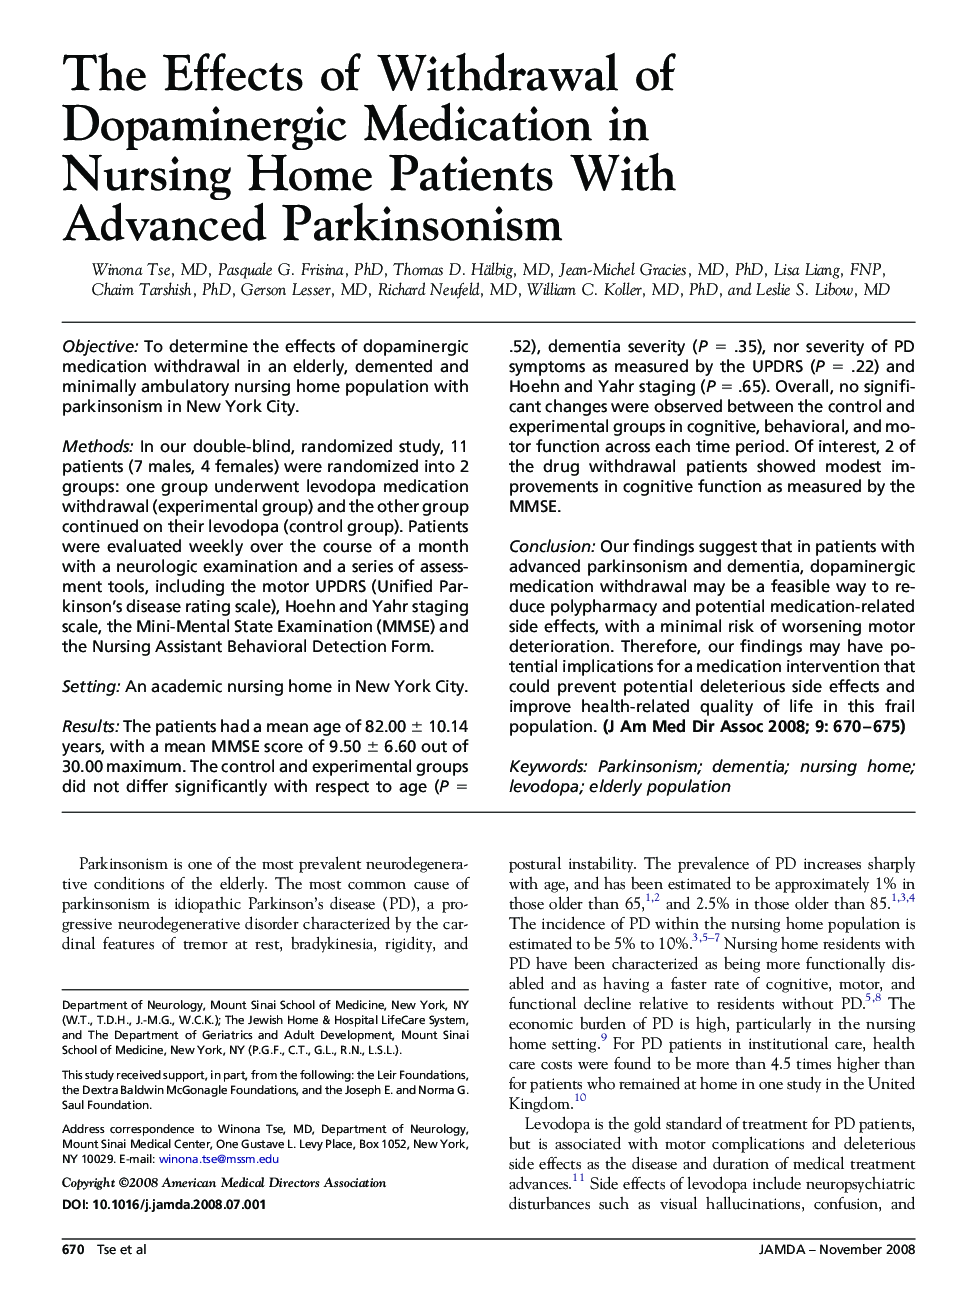 The Effects of Withdrawal of Dopaminergic Medication in Nursing Home Patients With Advanced Parkinsonism